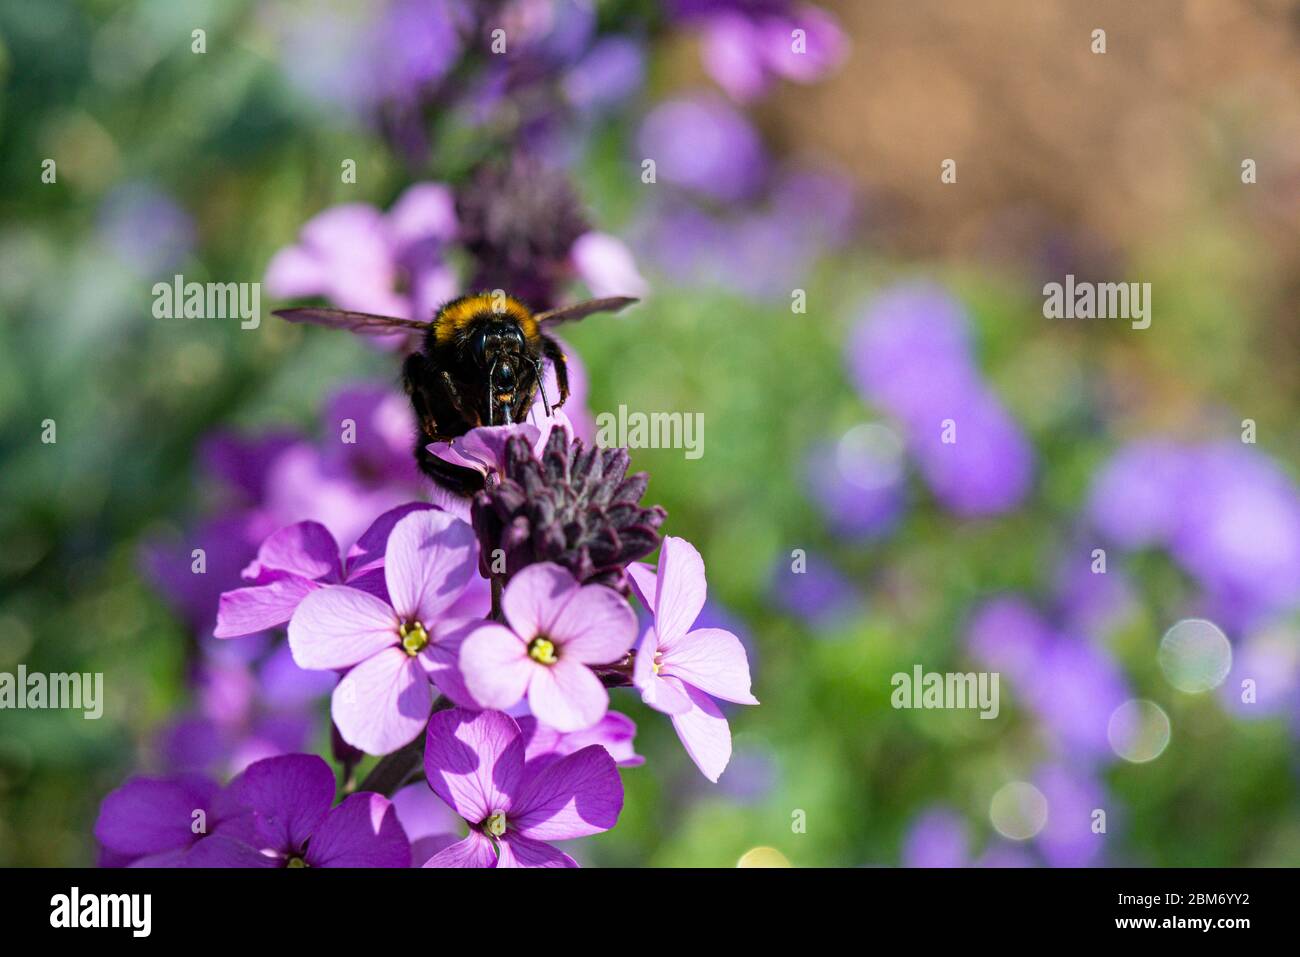 A bumble bee on the flowers of a wallflower 'Bowles's Mauve' (Erysimum 'Bowles's Mauve') Stock Photo